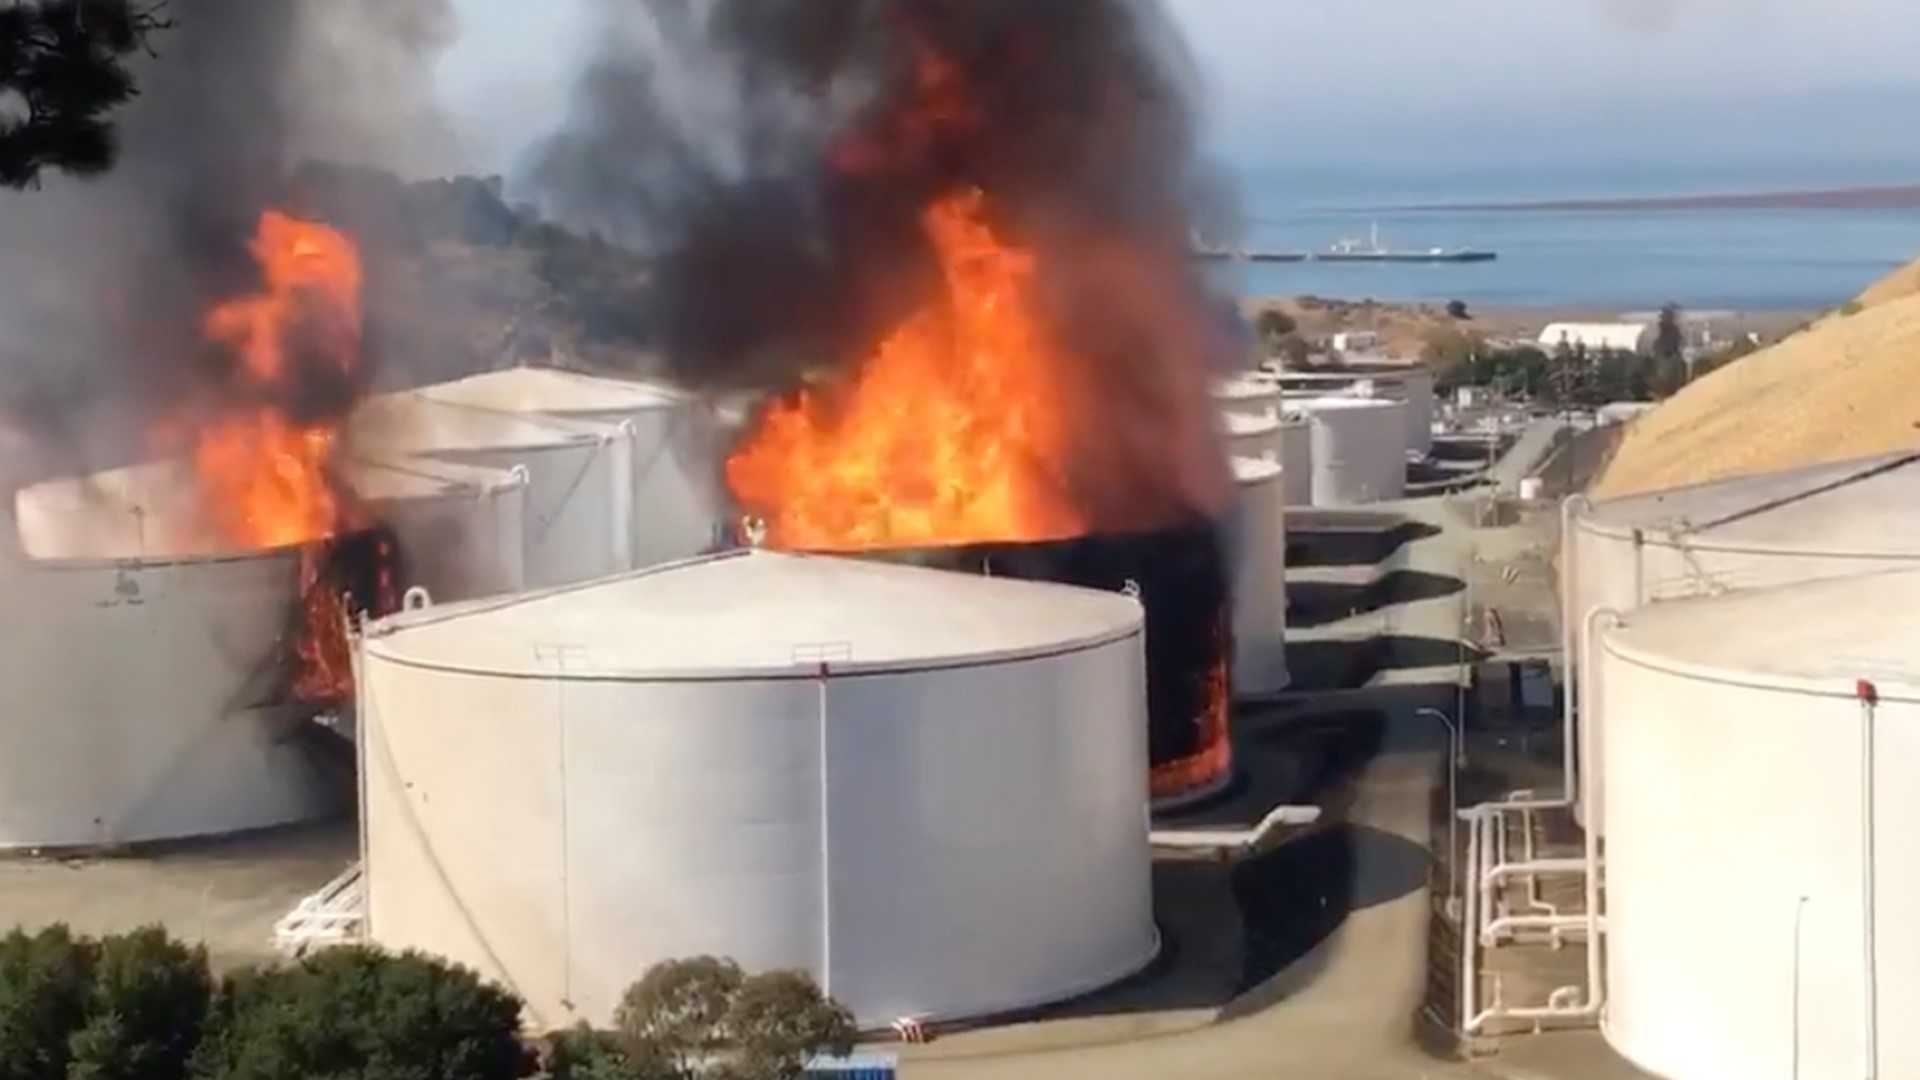 The fire at the NuStar facility in the East Bay has been contained, but, crews will still be putting water and foam on the area throughout the night.